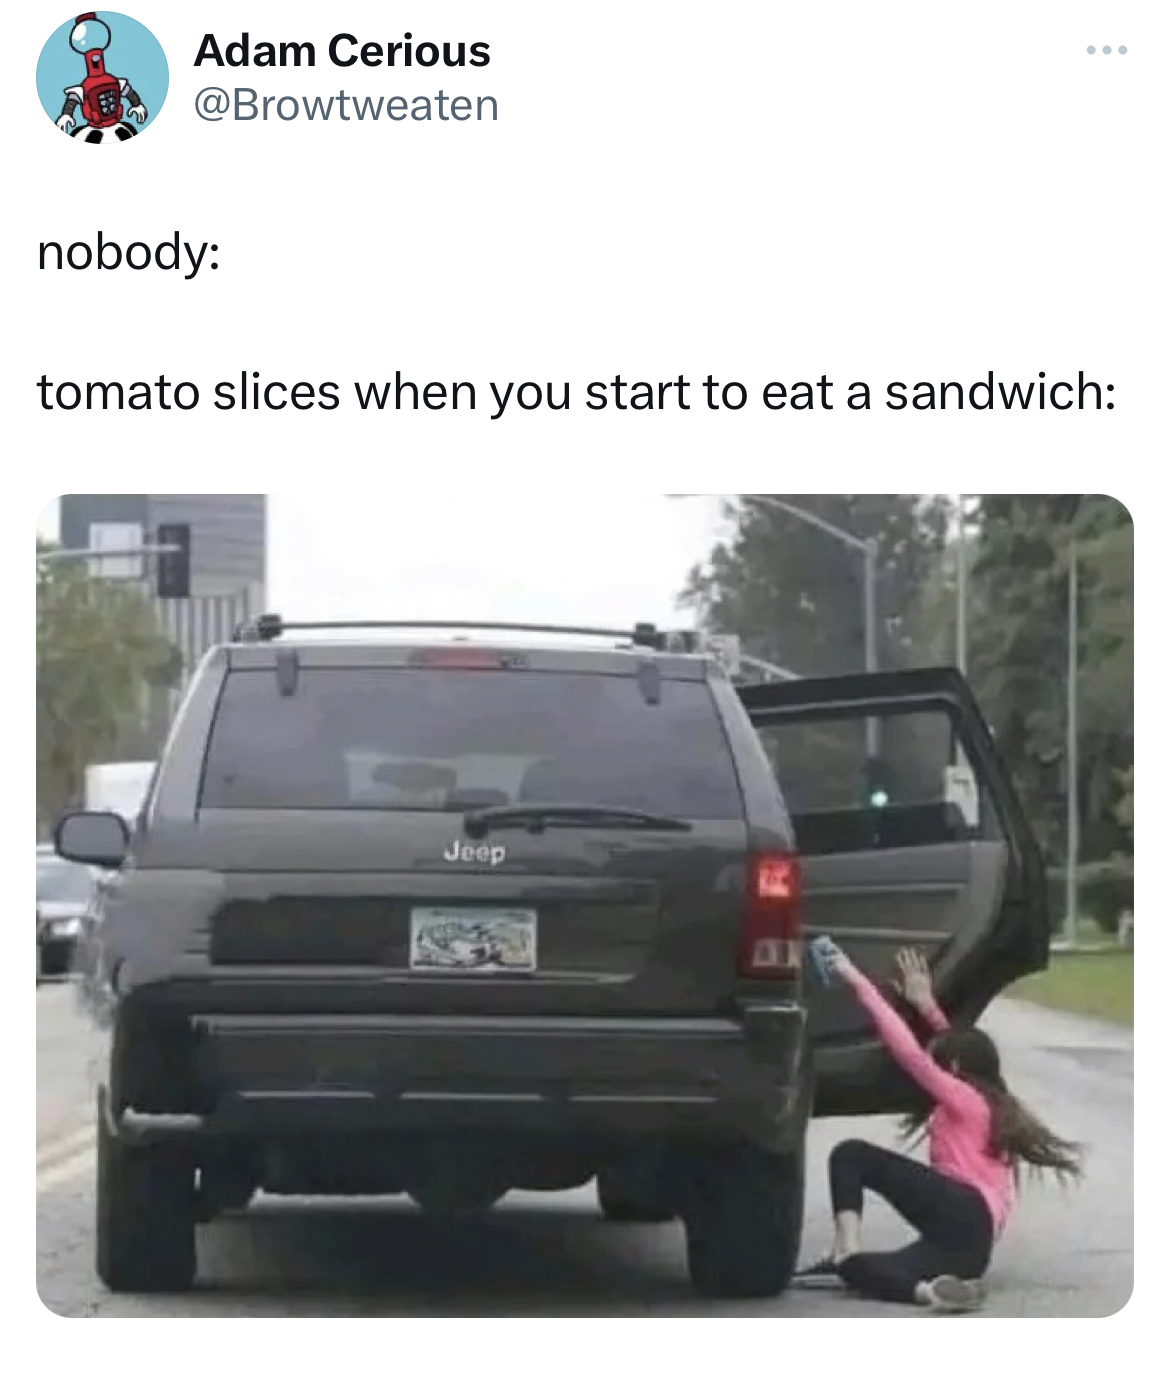 savage tweets - bumper - Adam Cerious nobody tomato slices when you start to eat a sandwich Jeep 131